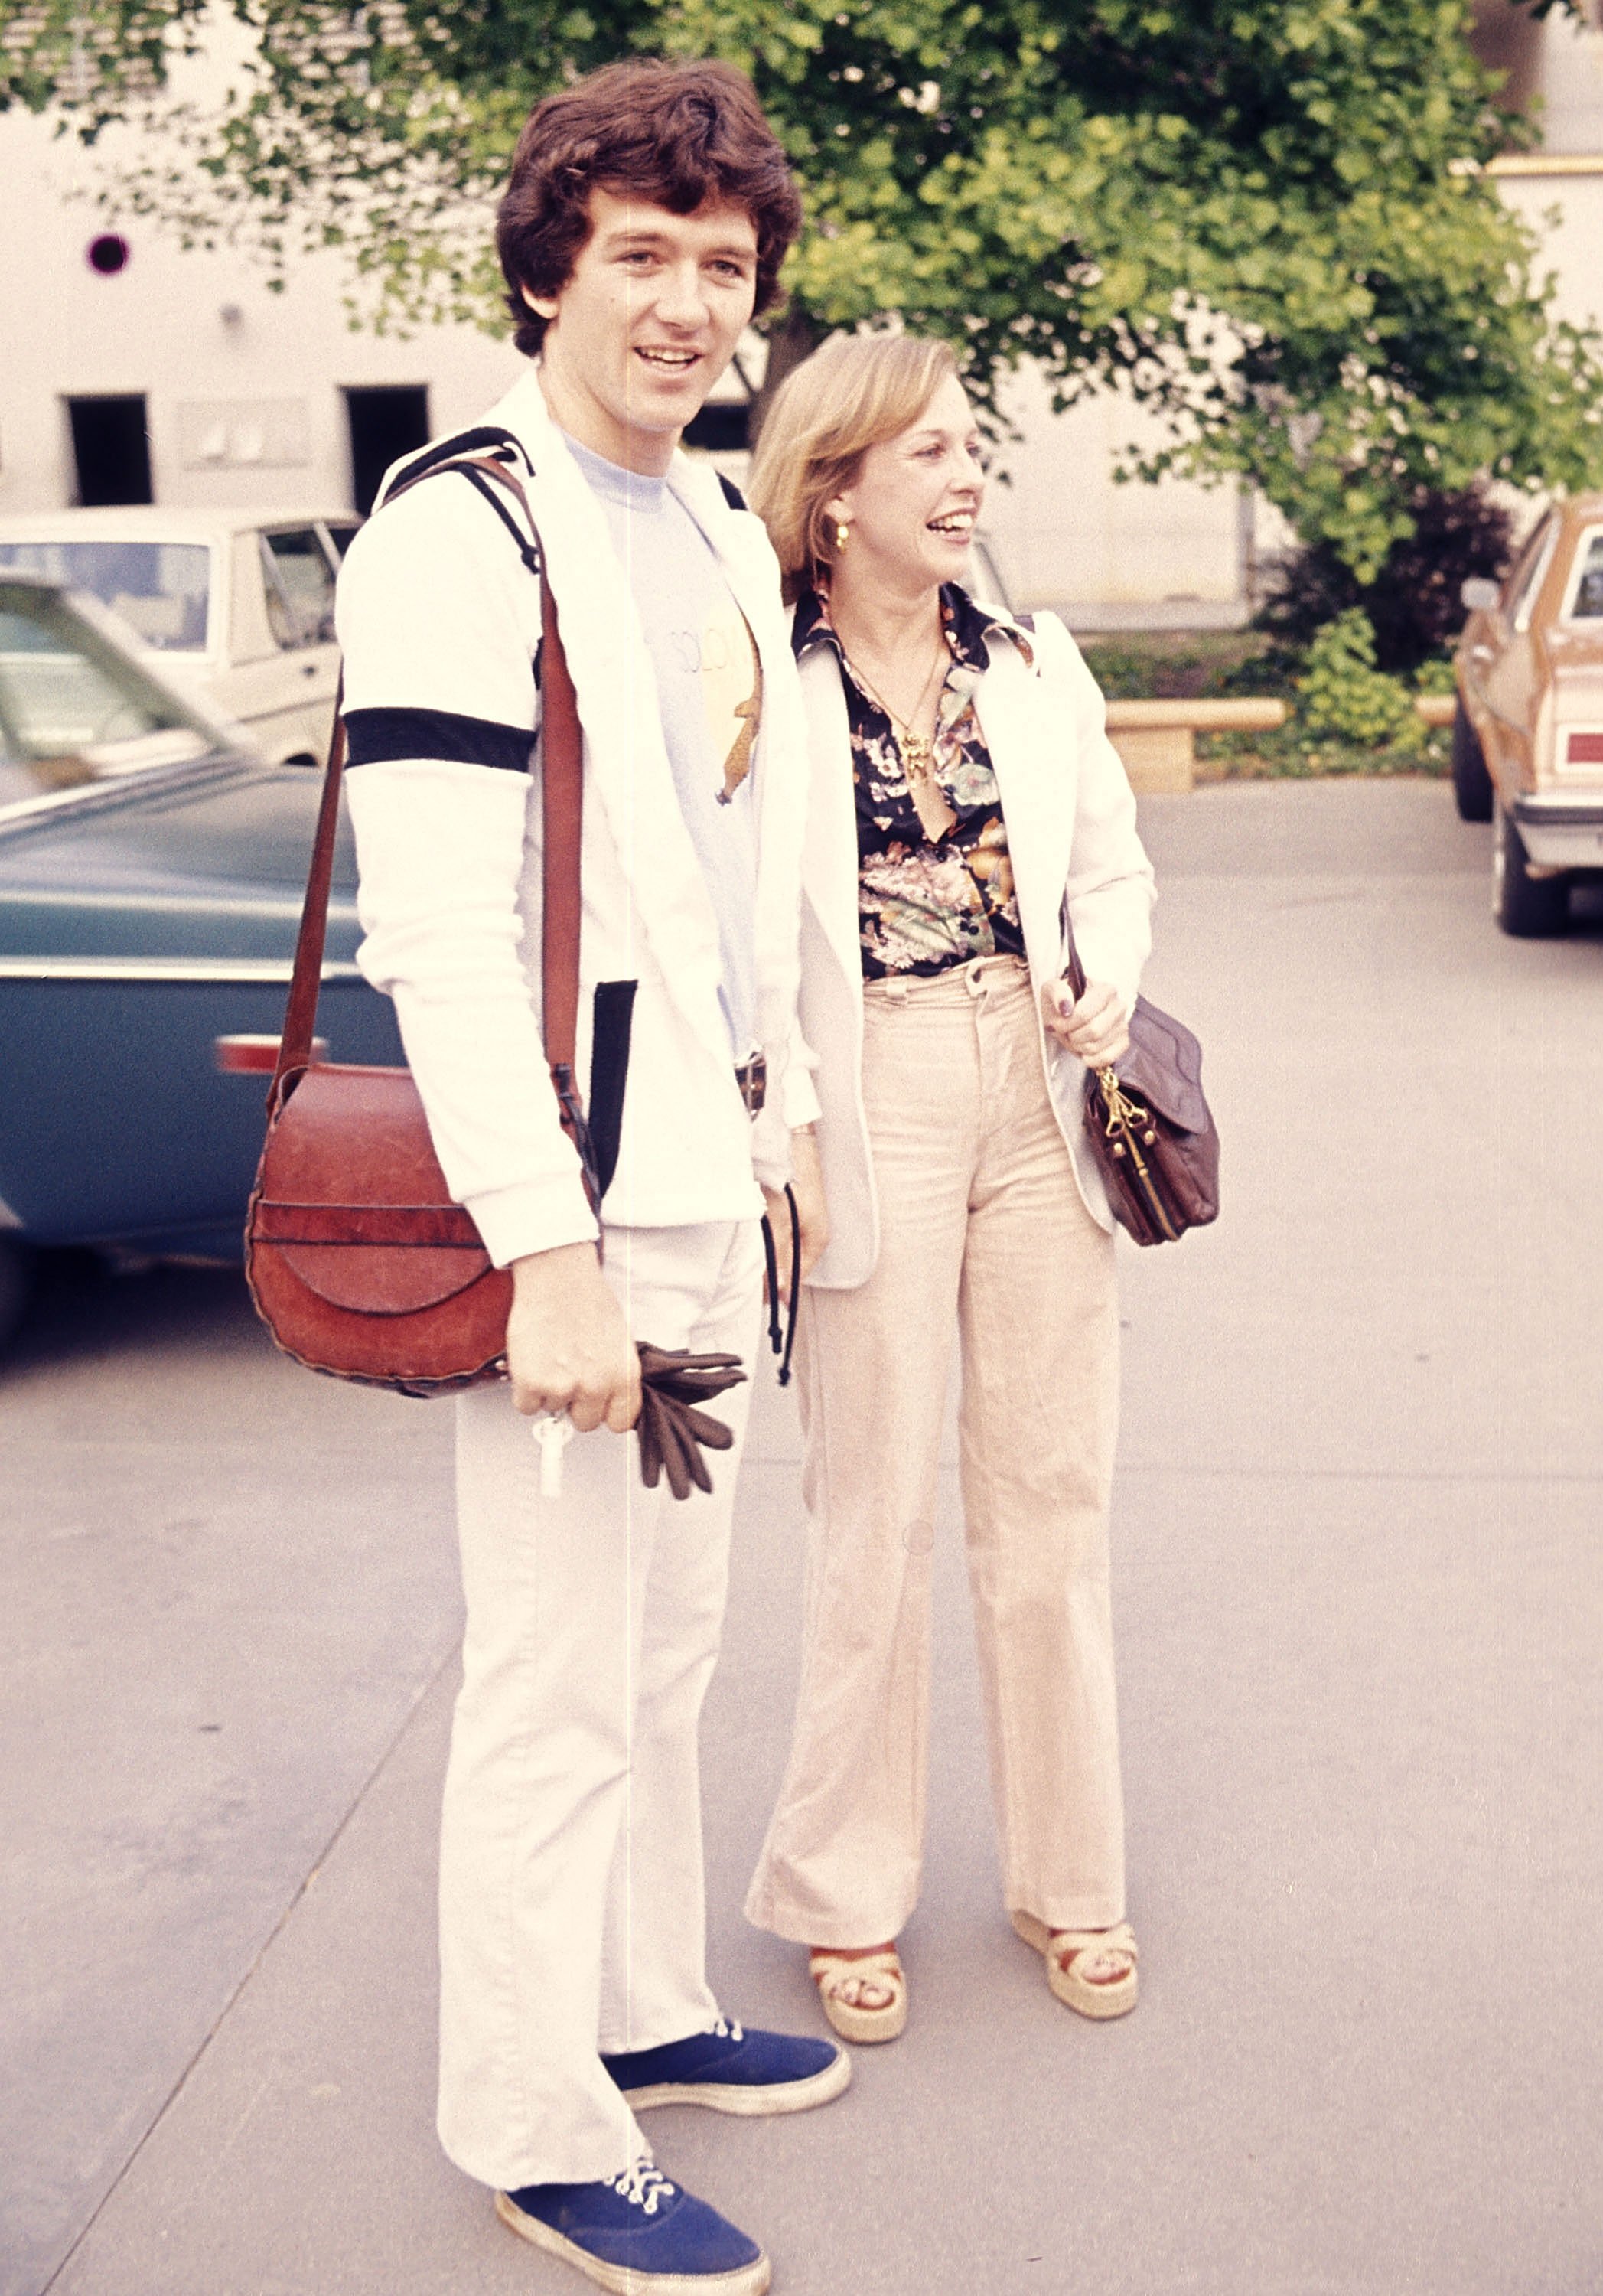 Patrick Duffy and wife Carlyn on May 22, 1977, at California State University in Northridge | Source: Getty Images